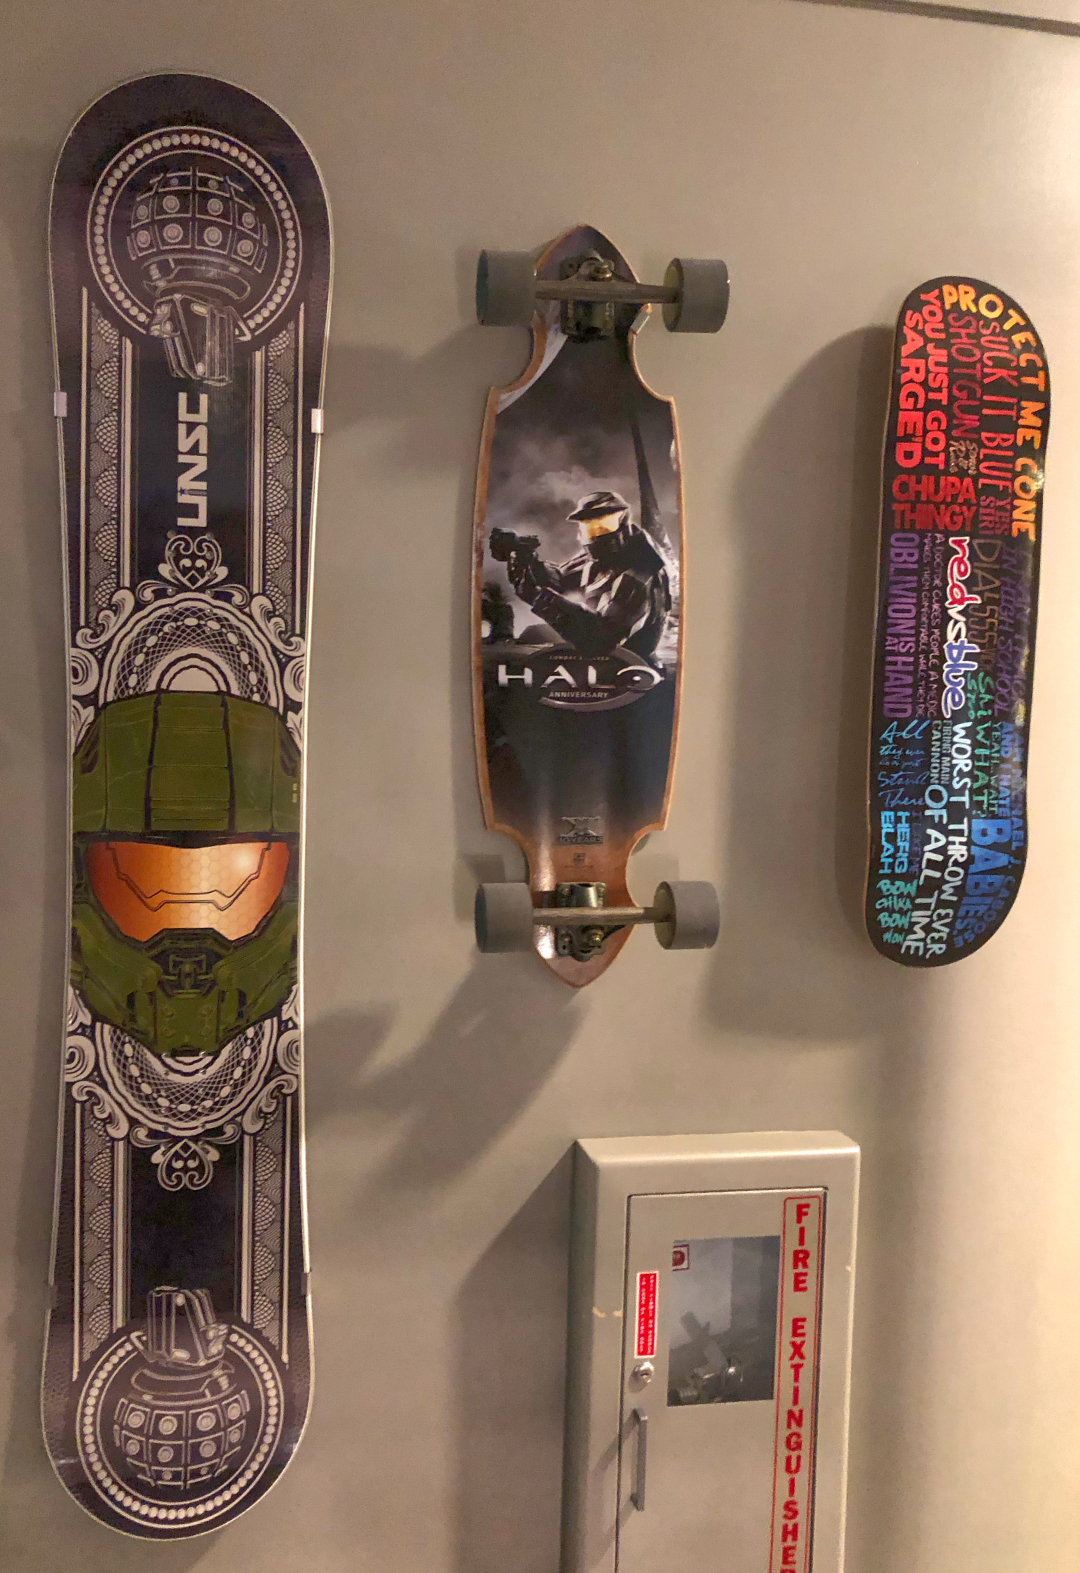 Halo snowboard and skateboards